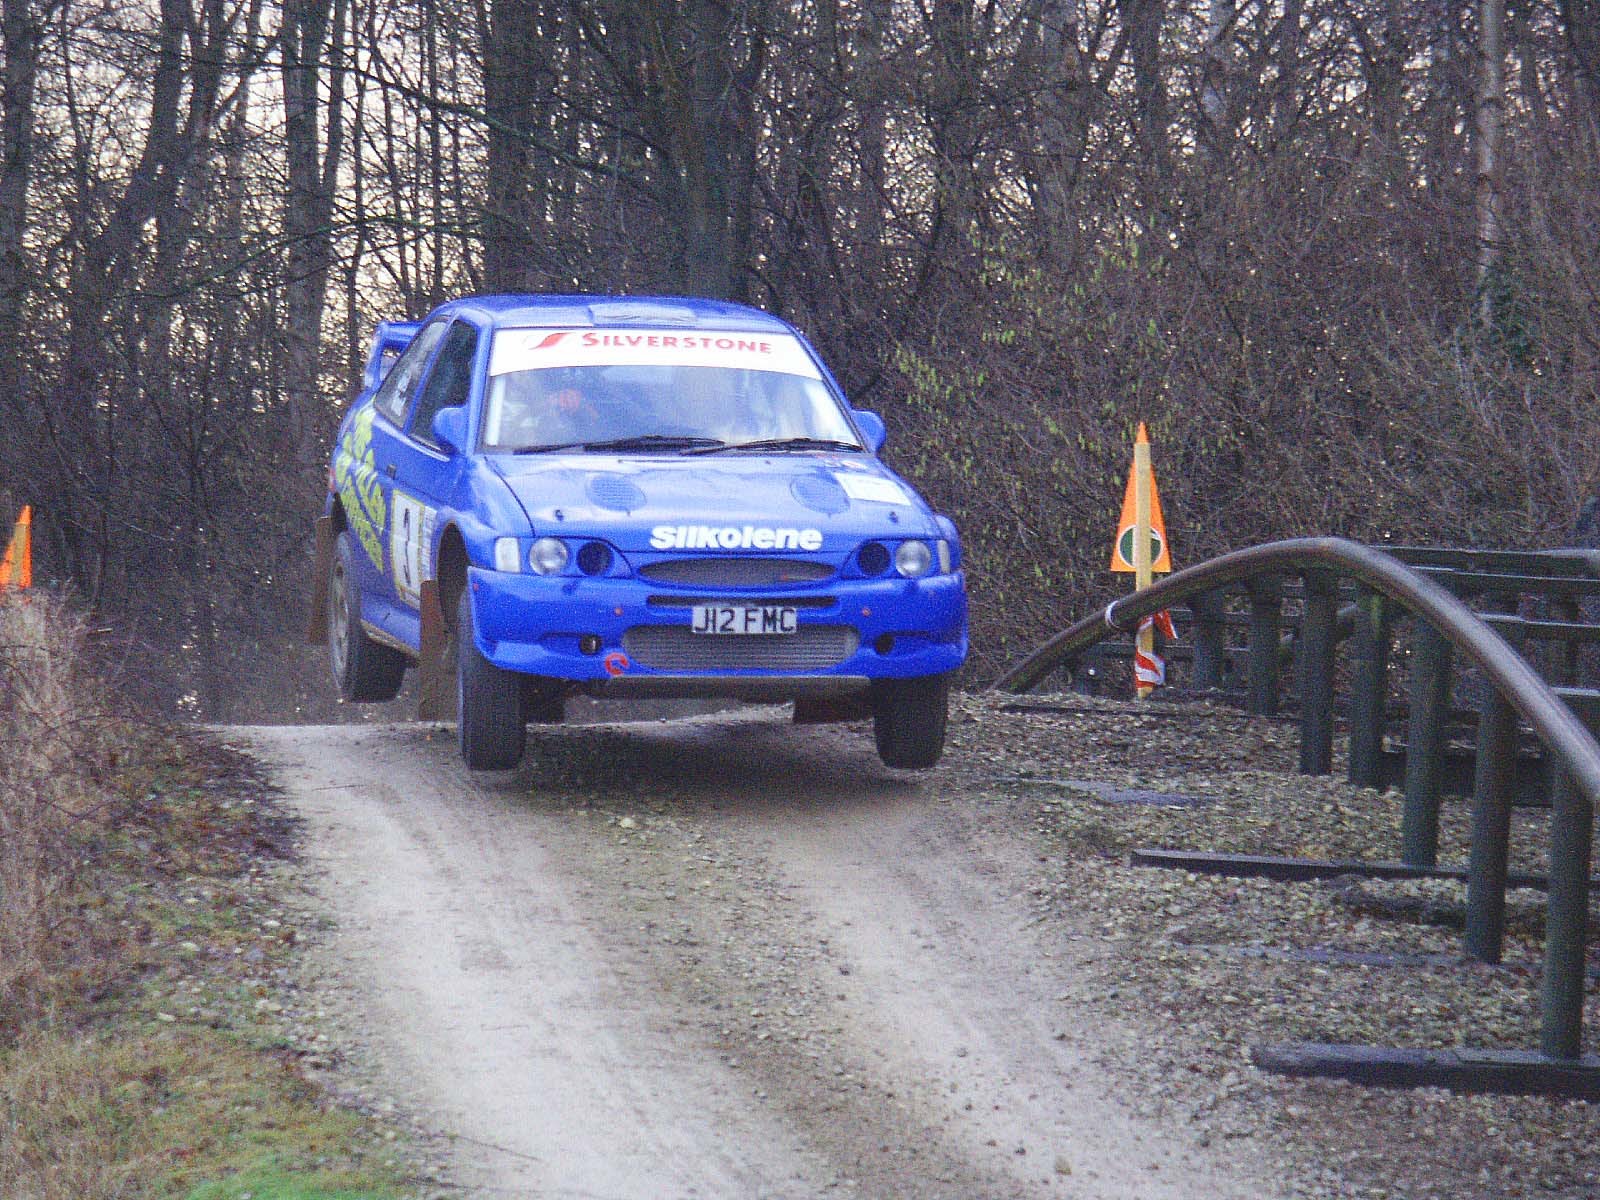 Ian Joel demonstrates the precarious proximity of the rally route to ‘The Ultimate Picture: ANDY ELLIS